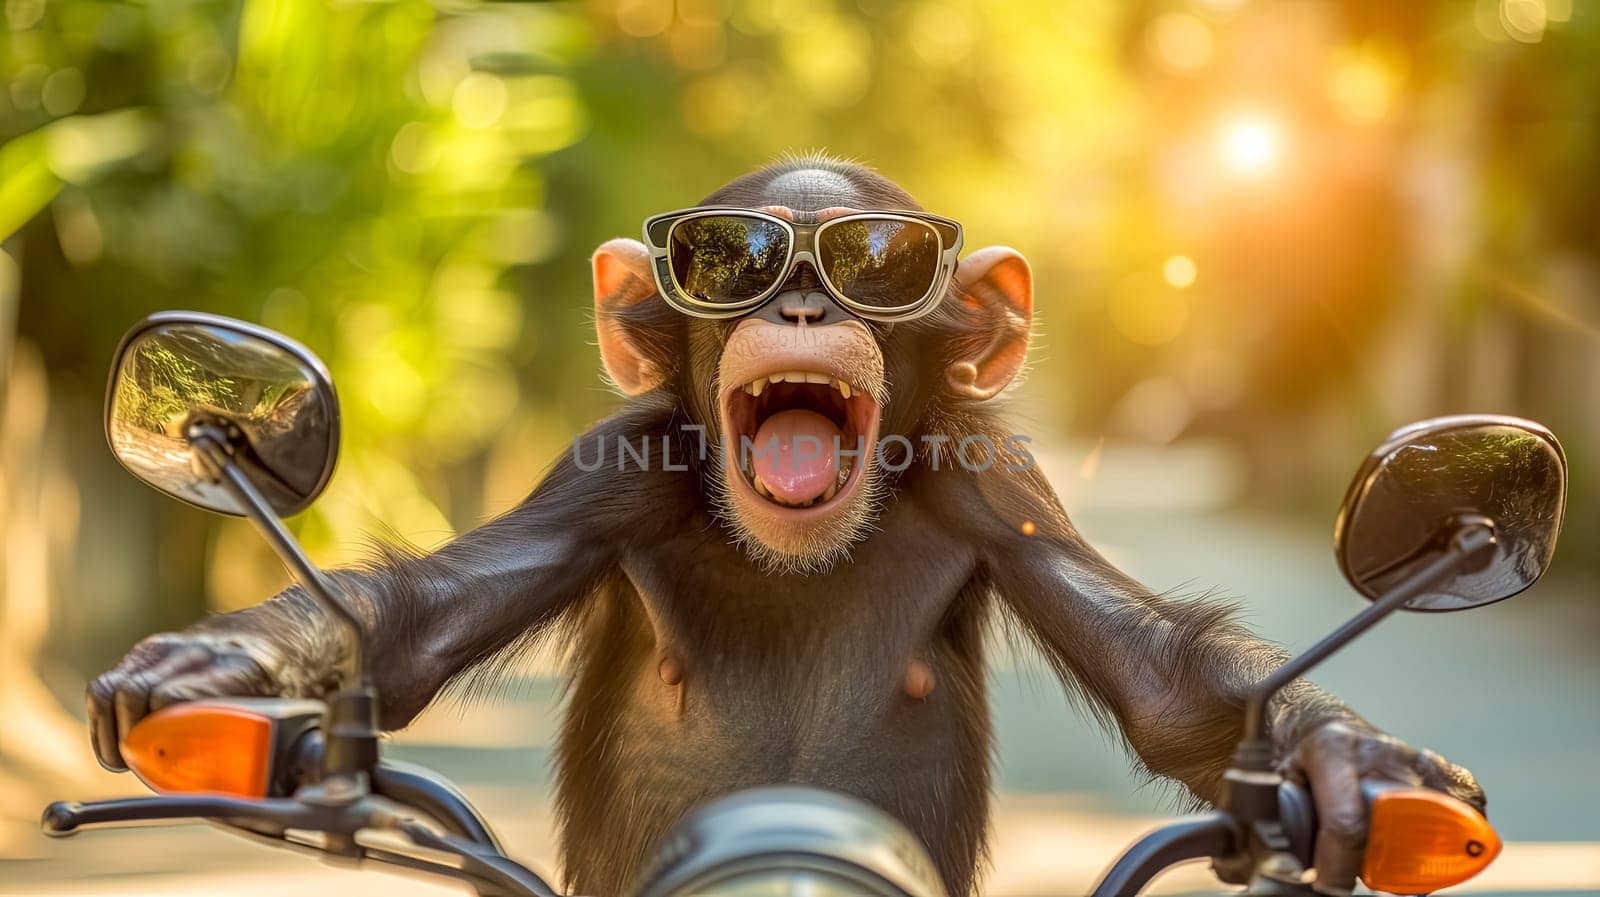 In a cartoon movie, a happy chimpanzee wearing sunglasses is having fun as it rides a motorcycle, showcasing a supernatural gesture. It is a fictional character in this terrestrial animal art piece